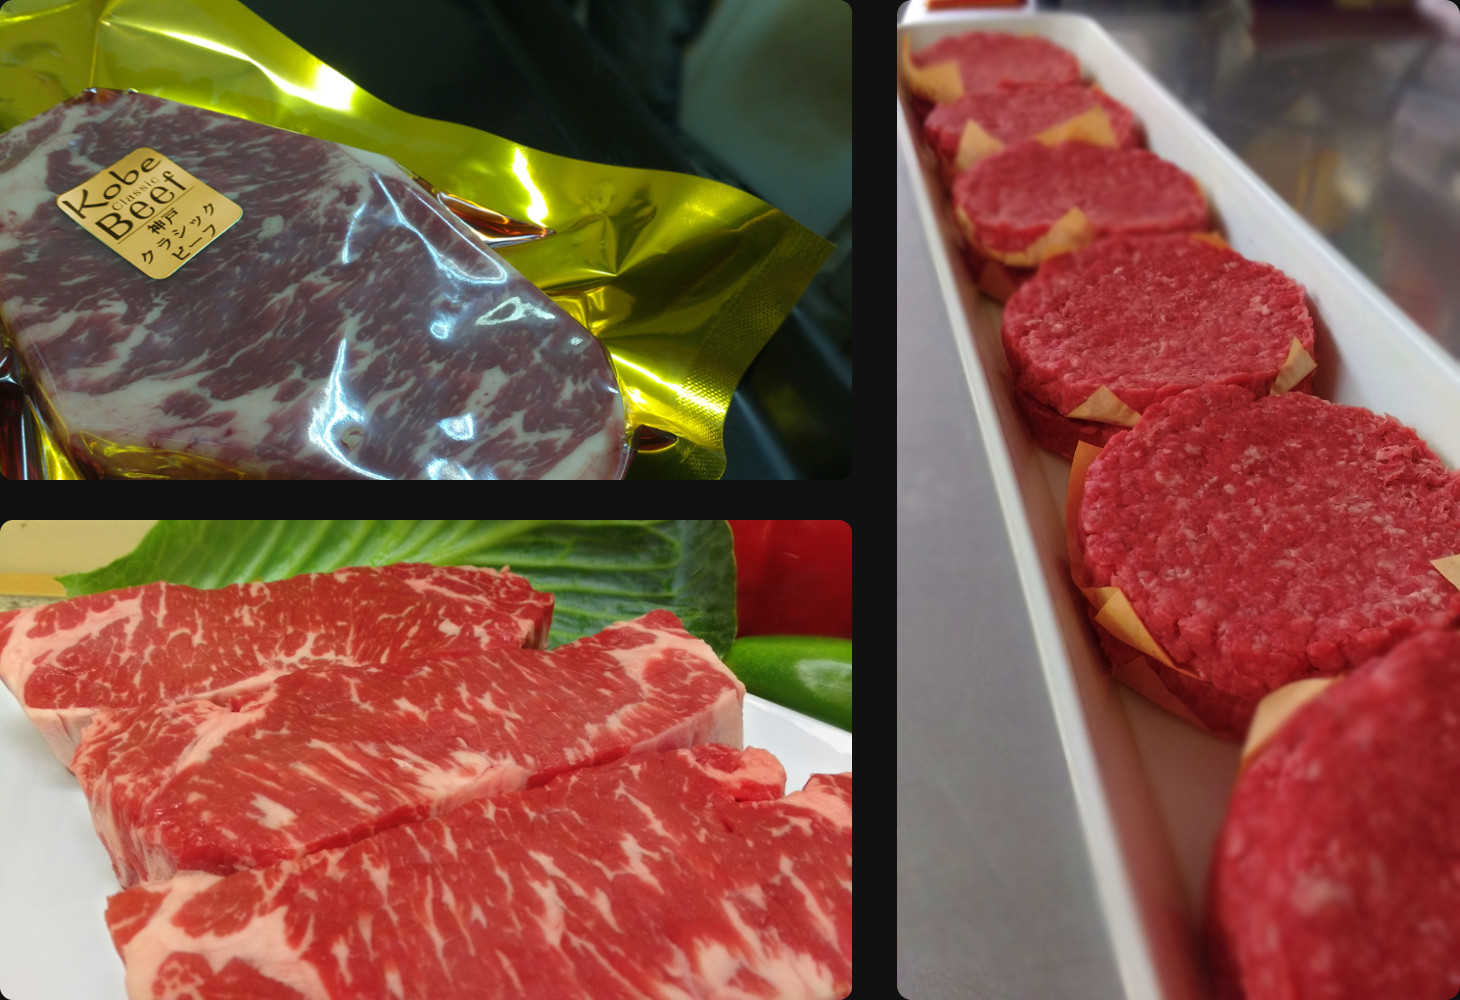 Specialty Meats Plus Dry Aged Beef, Burgers, and Kobe Steak